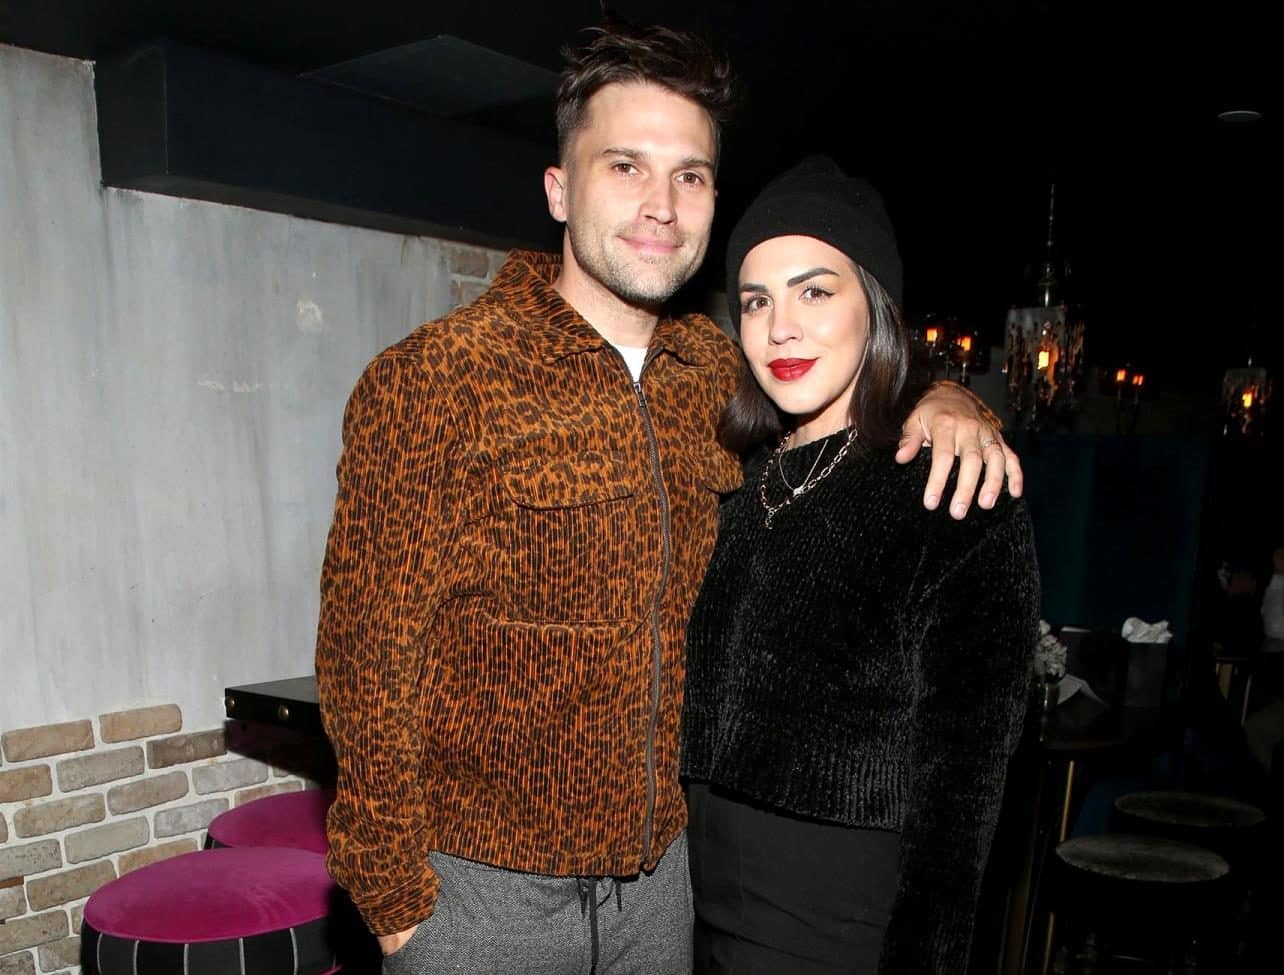 Pump Rules' Tom Schwartz Admits He's Still "Madly in Love" With Katie and He's "Horrified" About Dating, Plus Why He Finally Removed His Wedding Ring